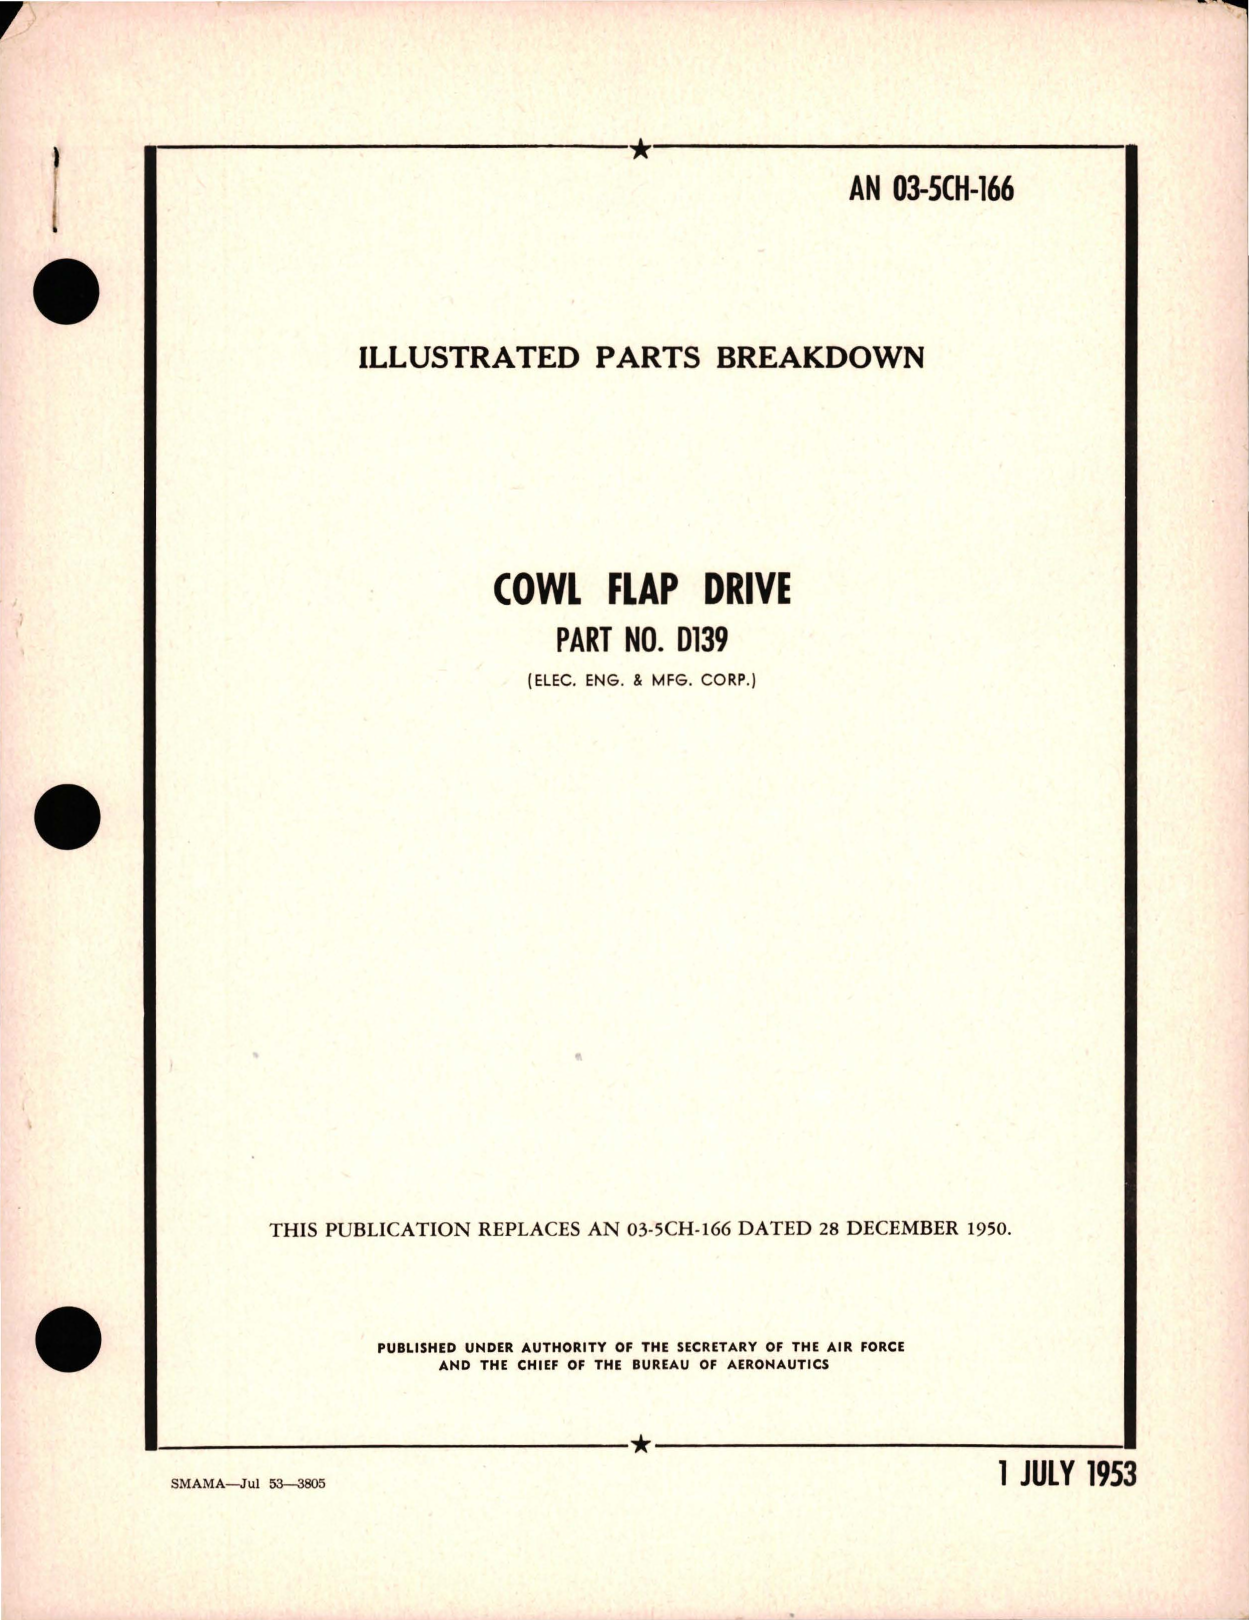 Sample page 1 from AirCorps Library document: Illustrated Parts Breakdown for Cowl Flap Drive - Part D139 